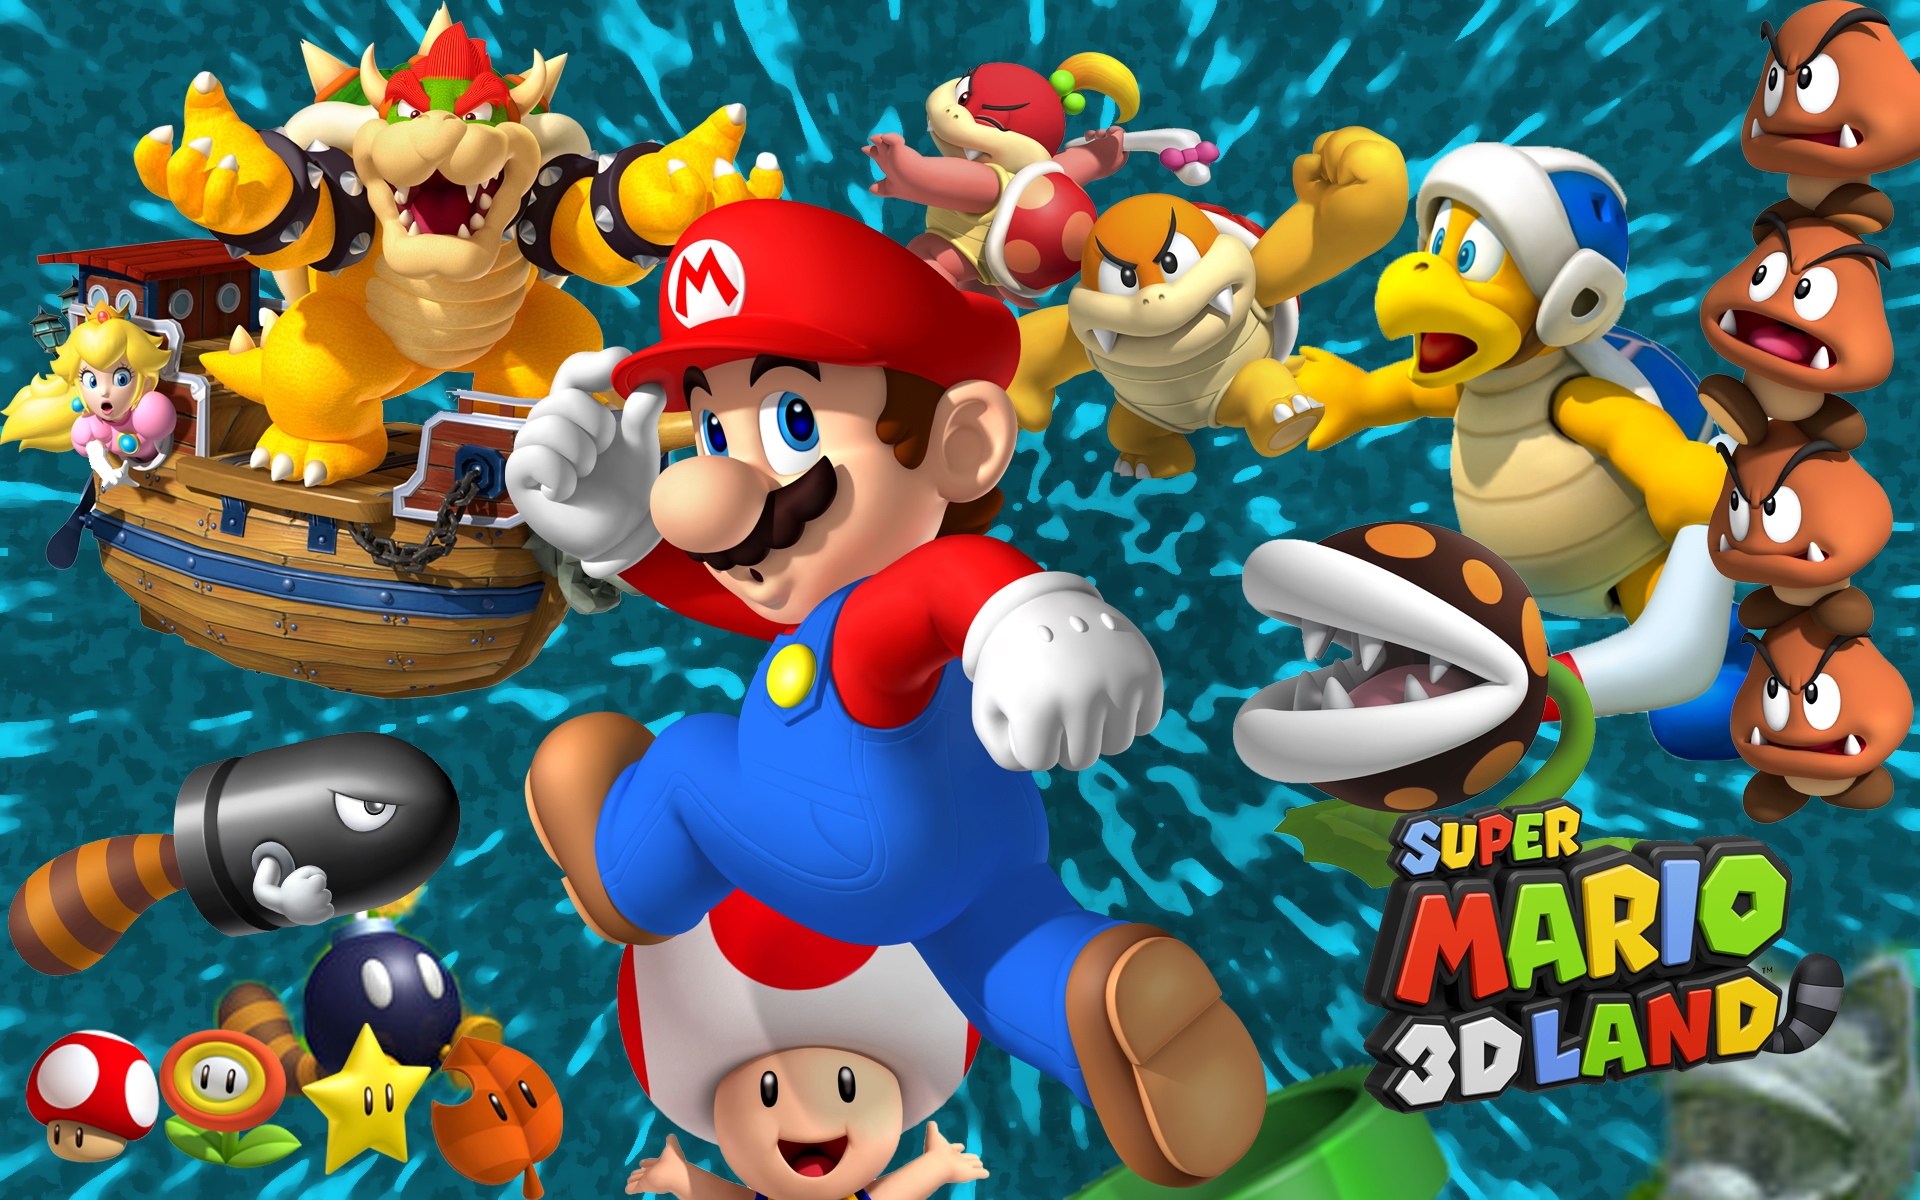 Super Mario 3d Land Exceeds Galaxy In First Year Sales